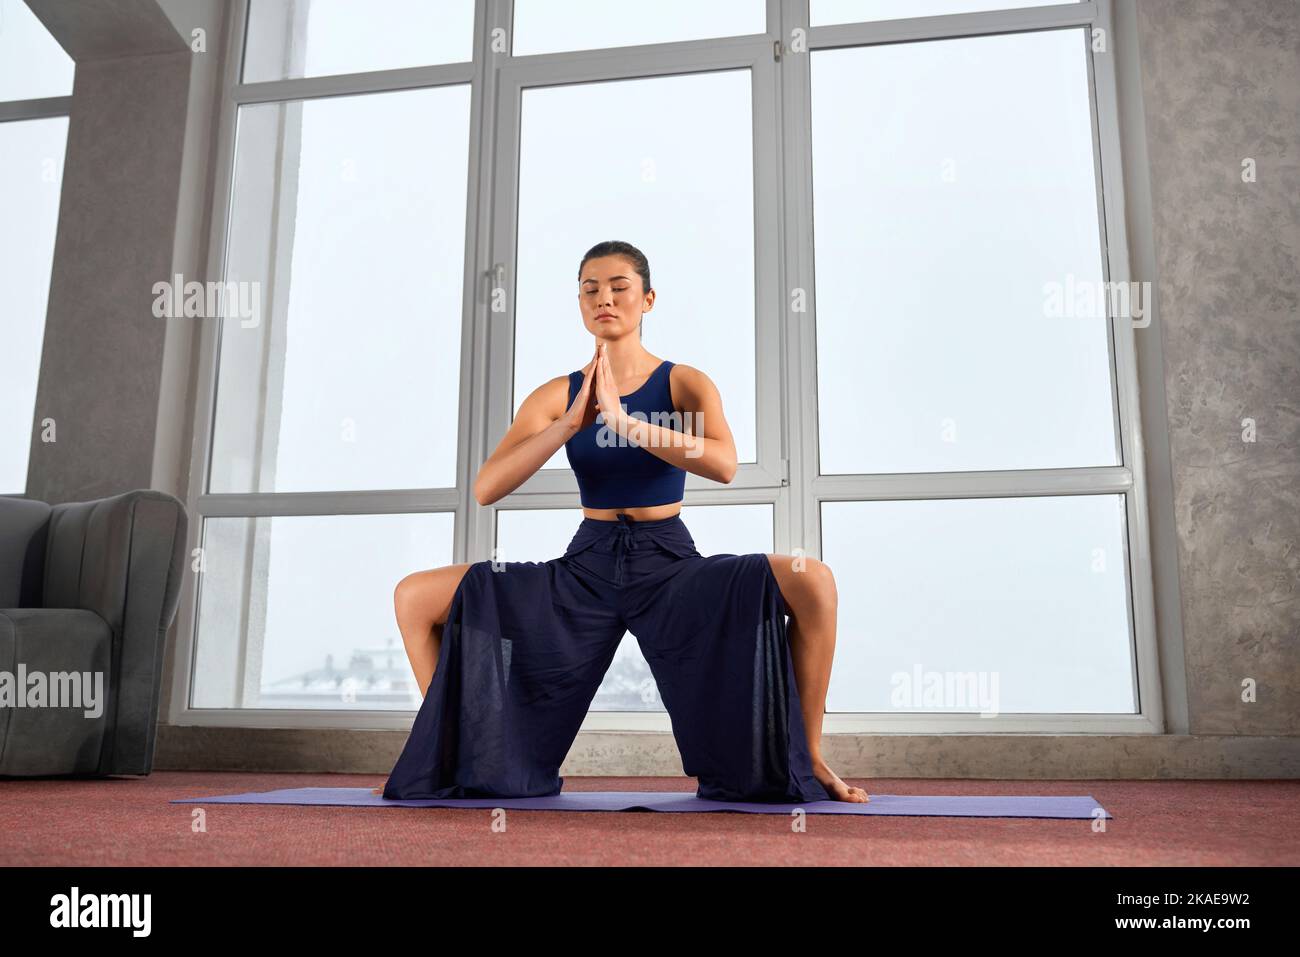 Side view of flexible girl sitting on bent legs, meditating indoors. Brunette female practicing yoga, with prayer hands and closed eyes, wearing palazzo pants. Concept of yoga. Stock Photo